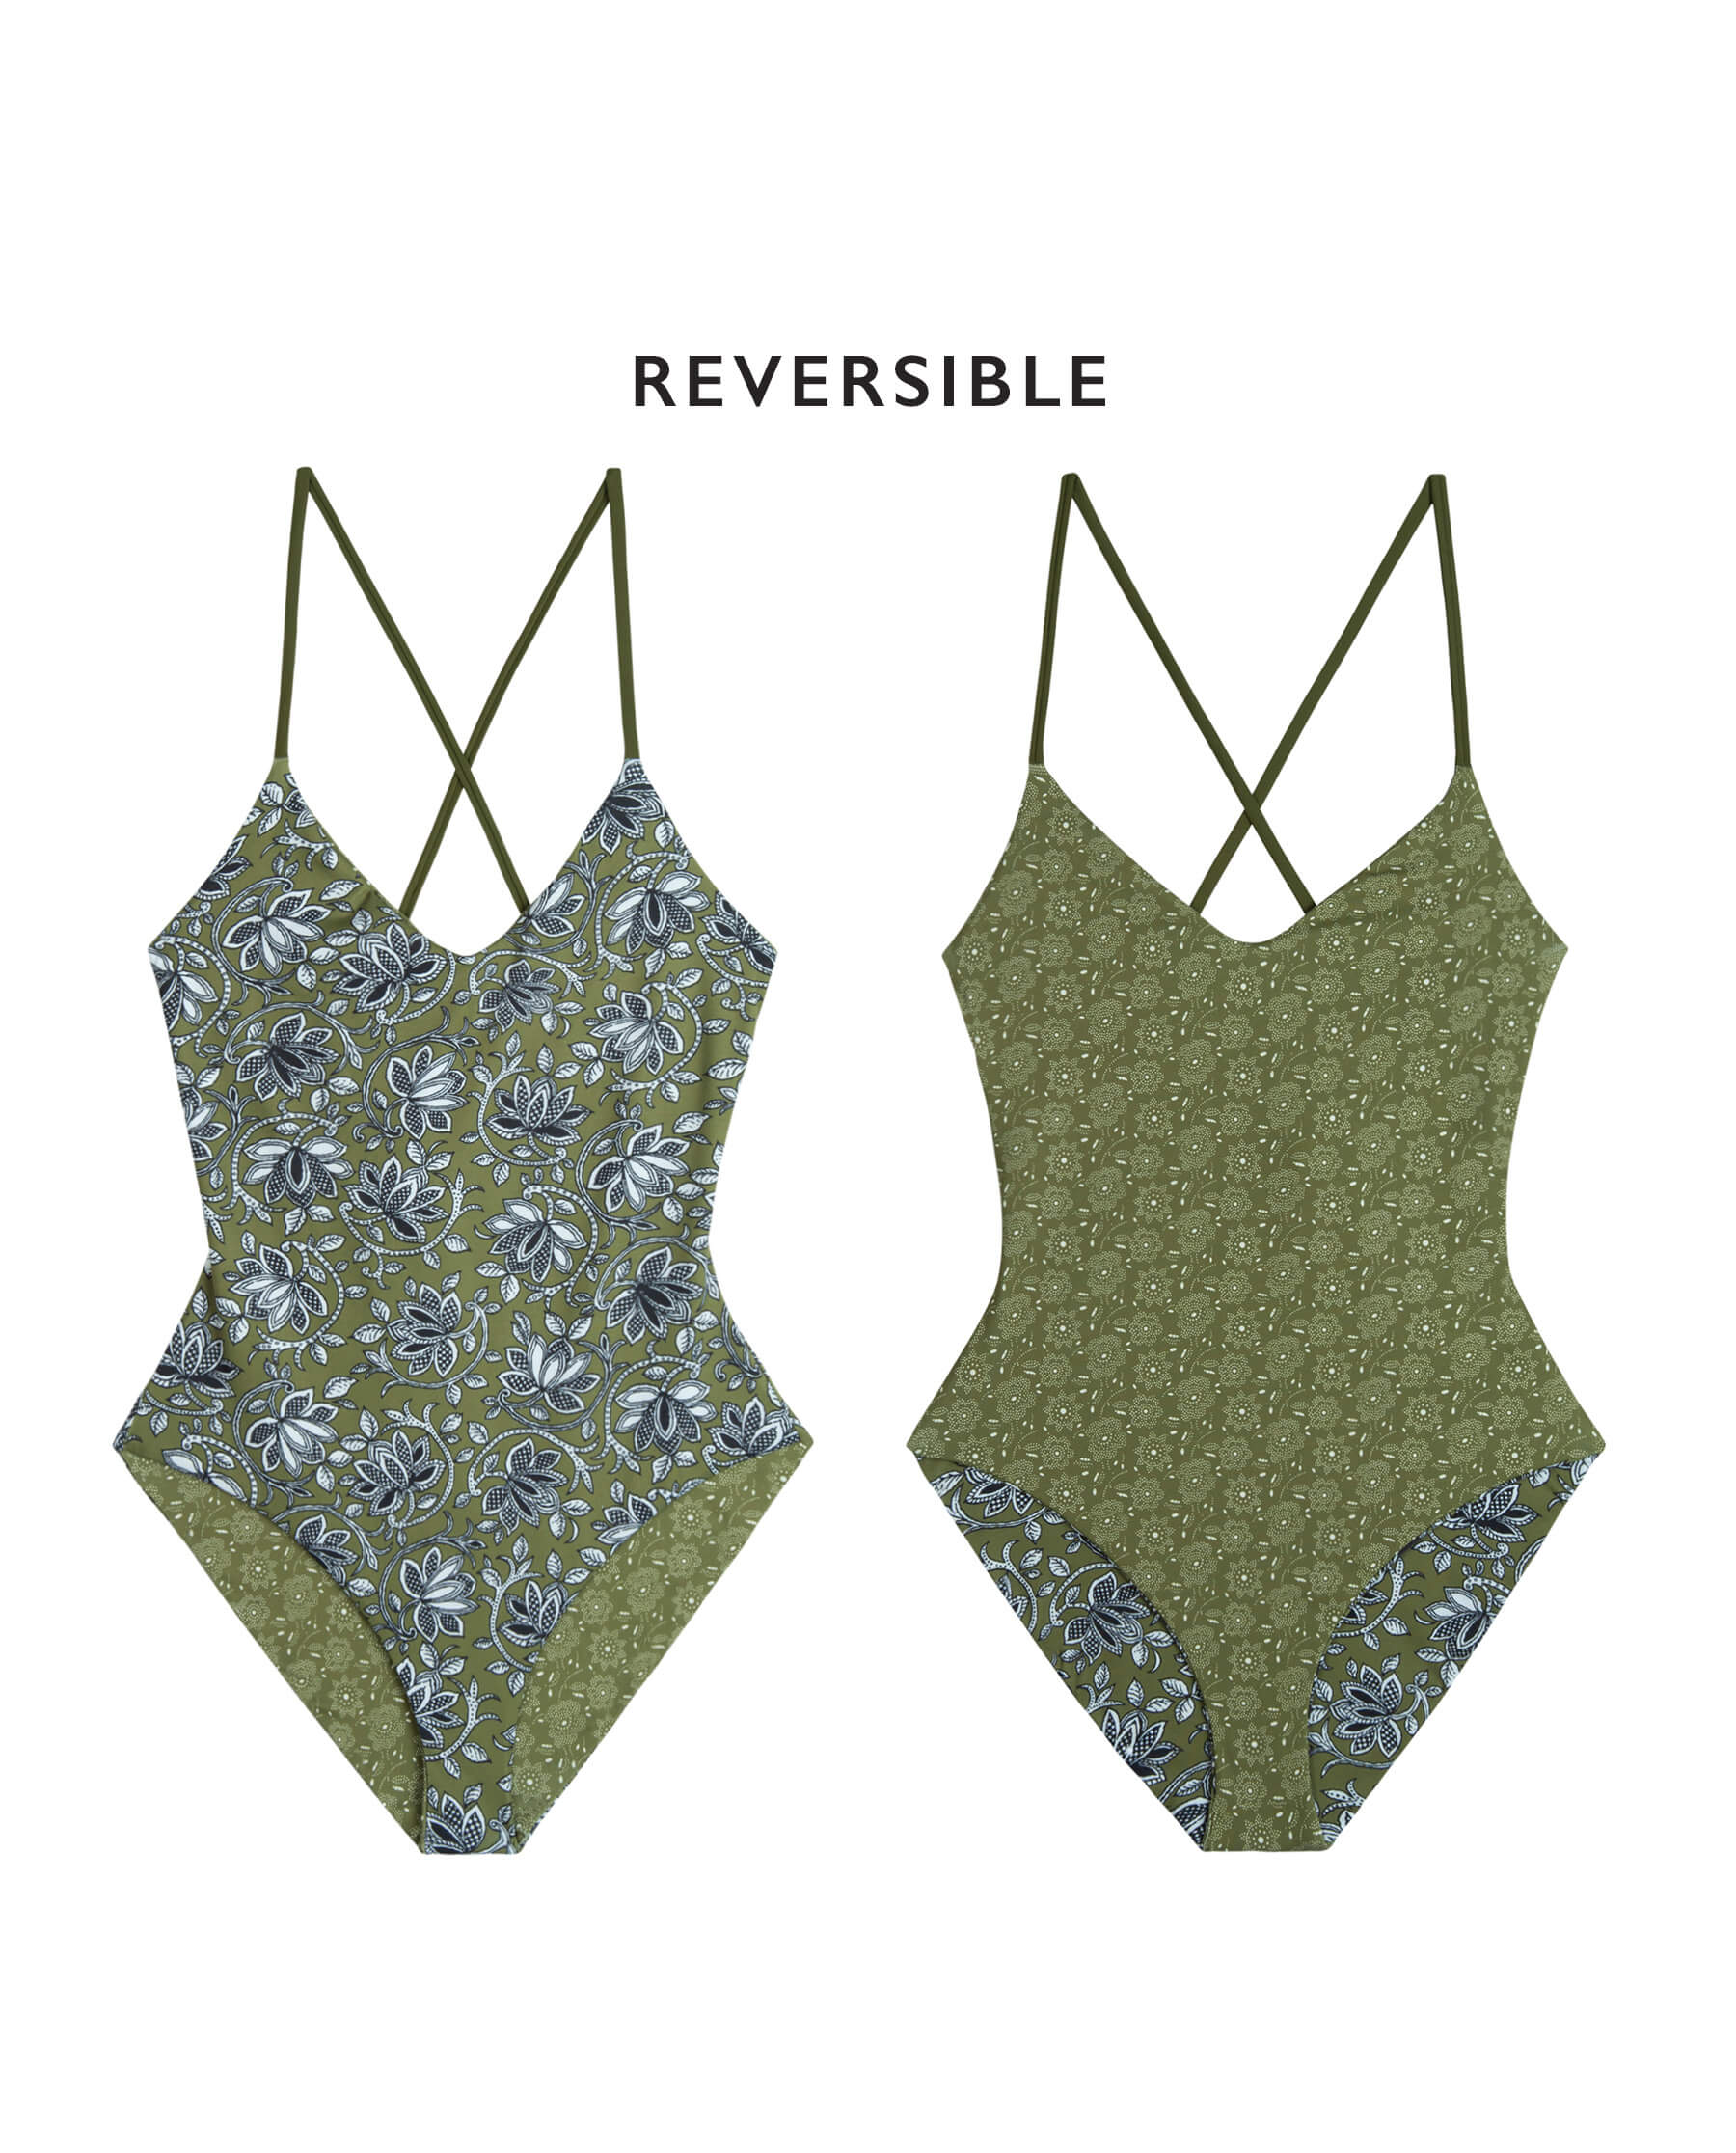 The Reversible Lace Up One Piece. -- Army Oasis Floral and Army Bandana Daisy SWIM ONE PIECES THE GREAT. SP24 SWIM